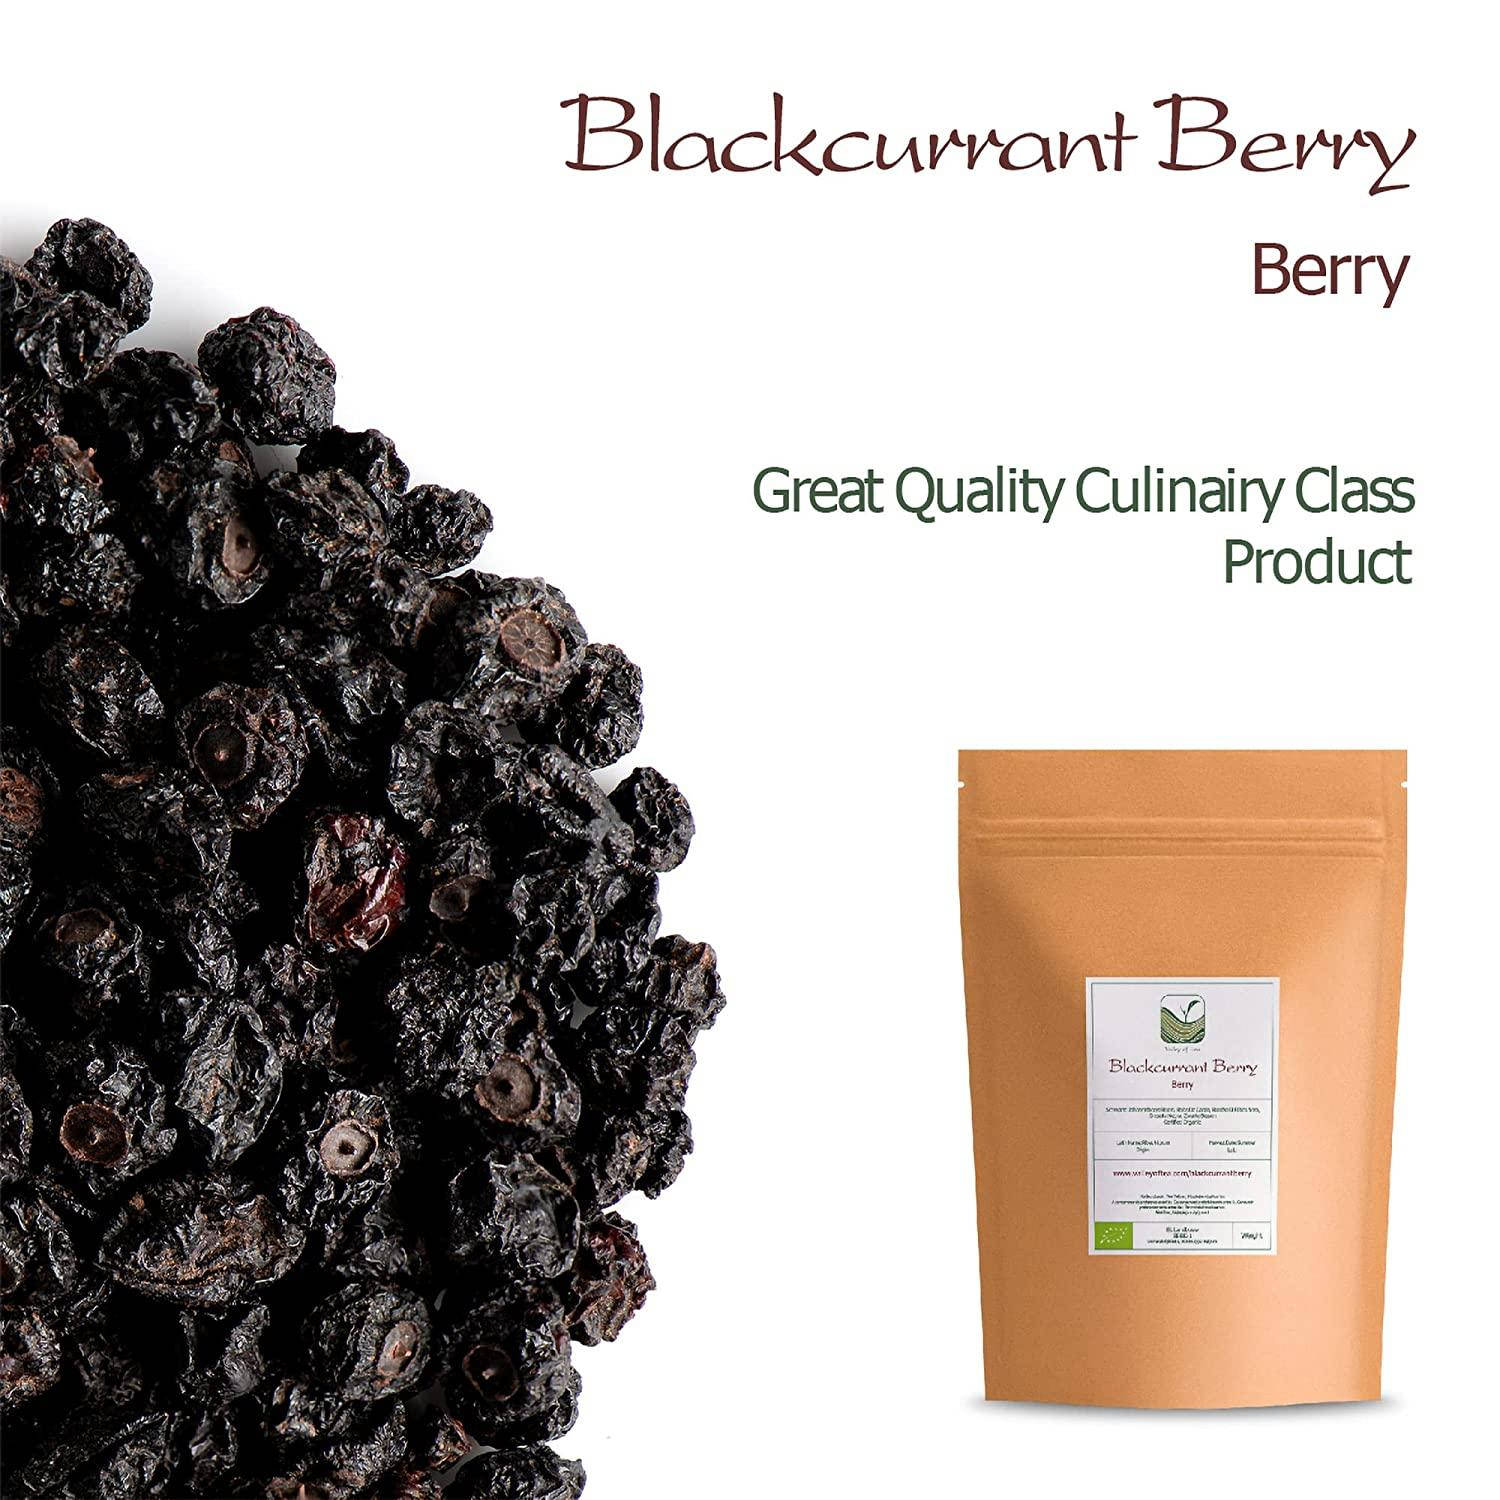 Dried Blackcurrant Berry Product Wallpaper